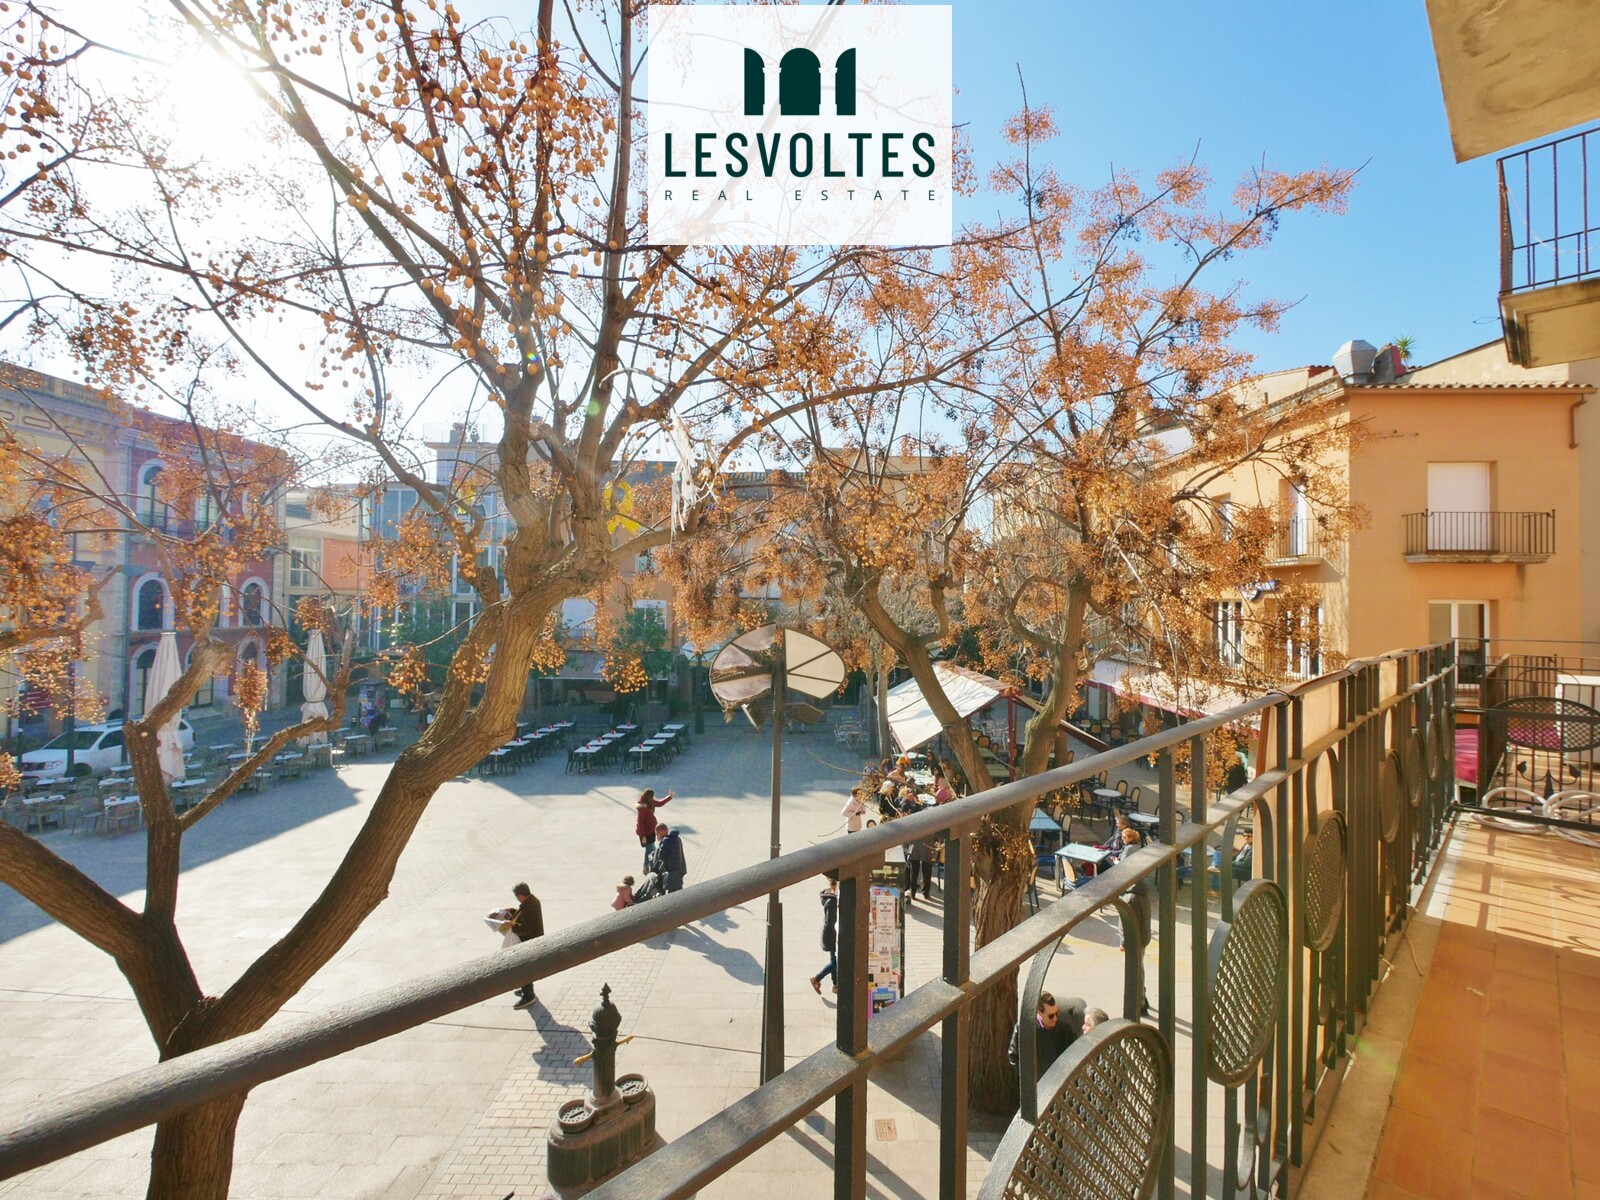 OFFICE FOR RENT IN THE CENTER OF PALAFRUGELL. IDEAL FOR PROFESSIONAL OFFICE.